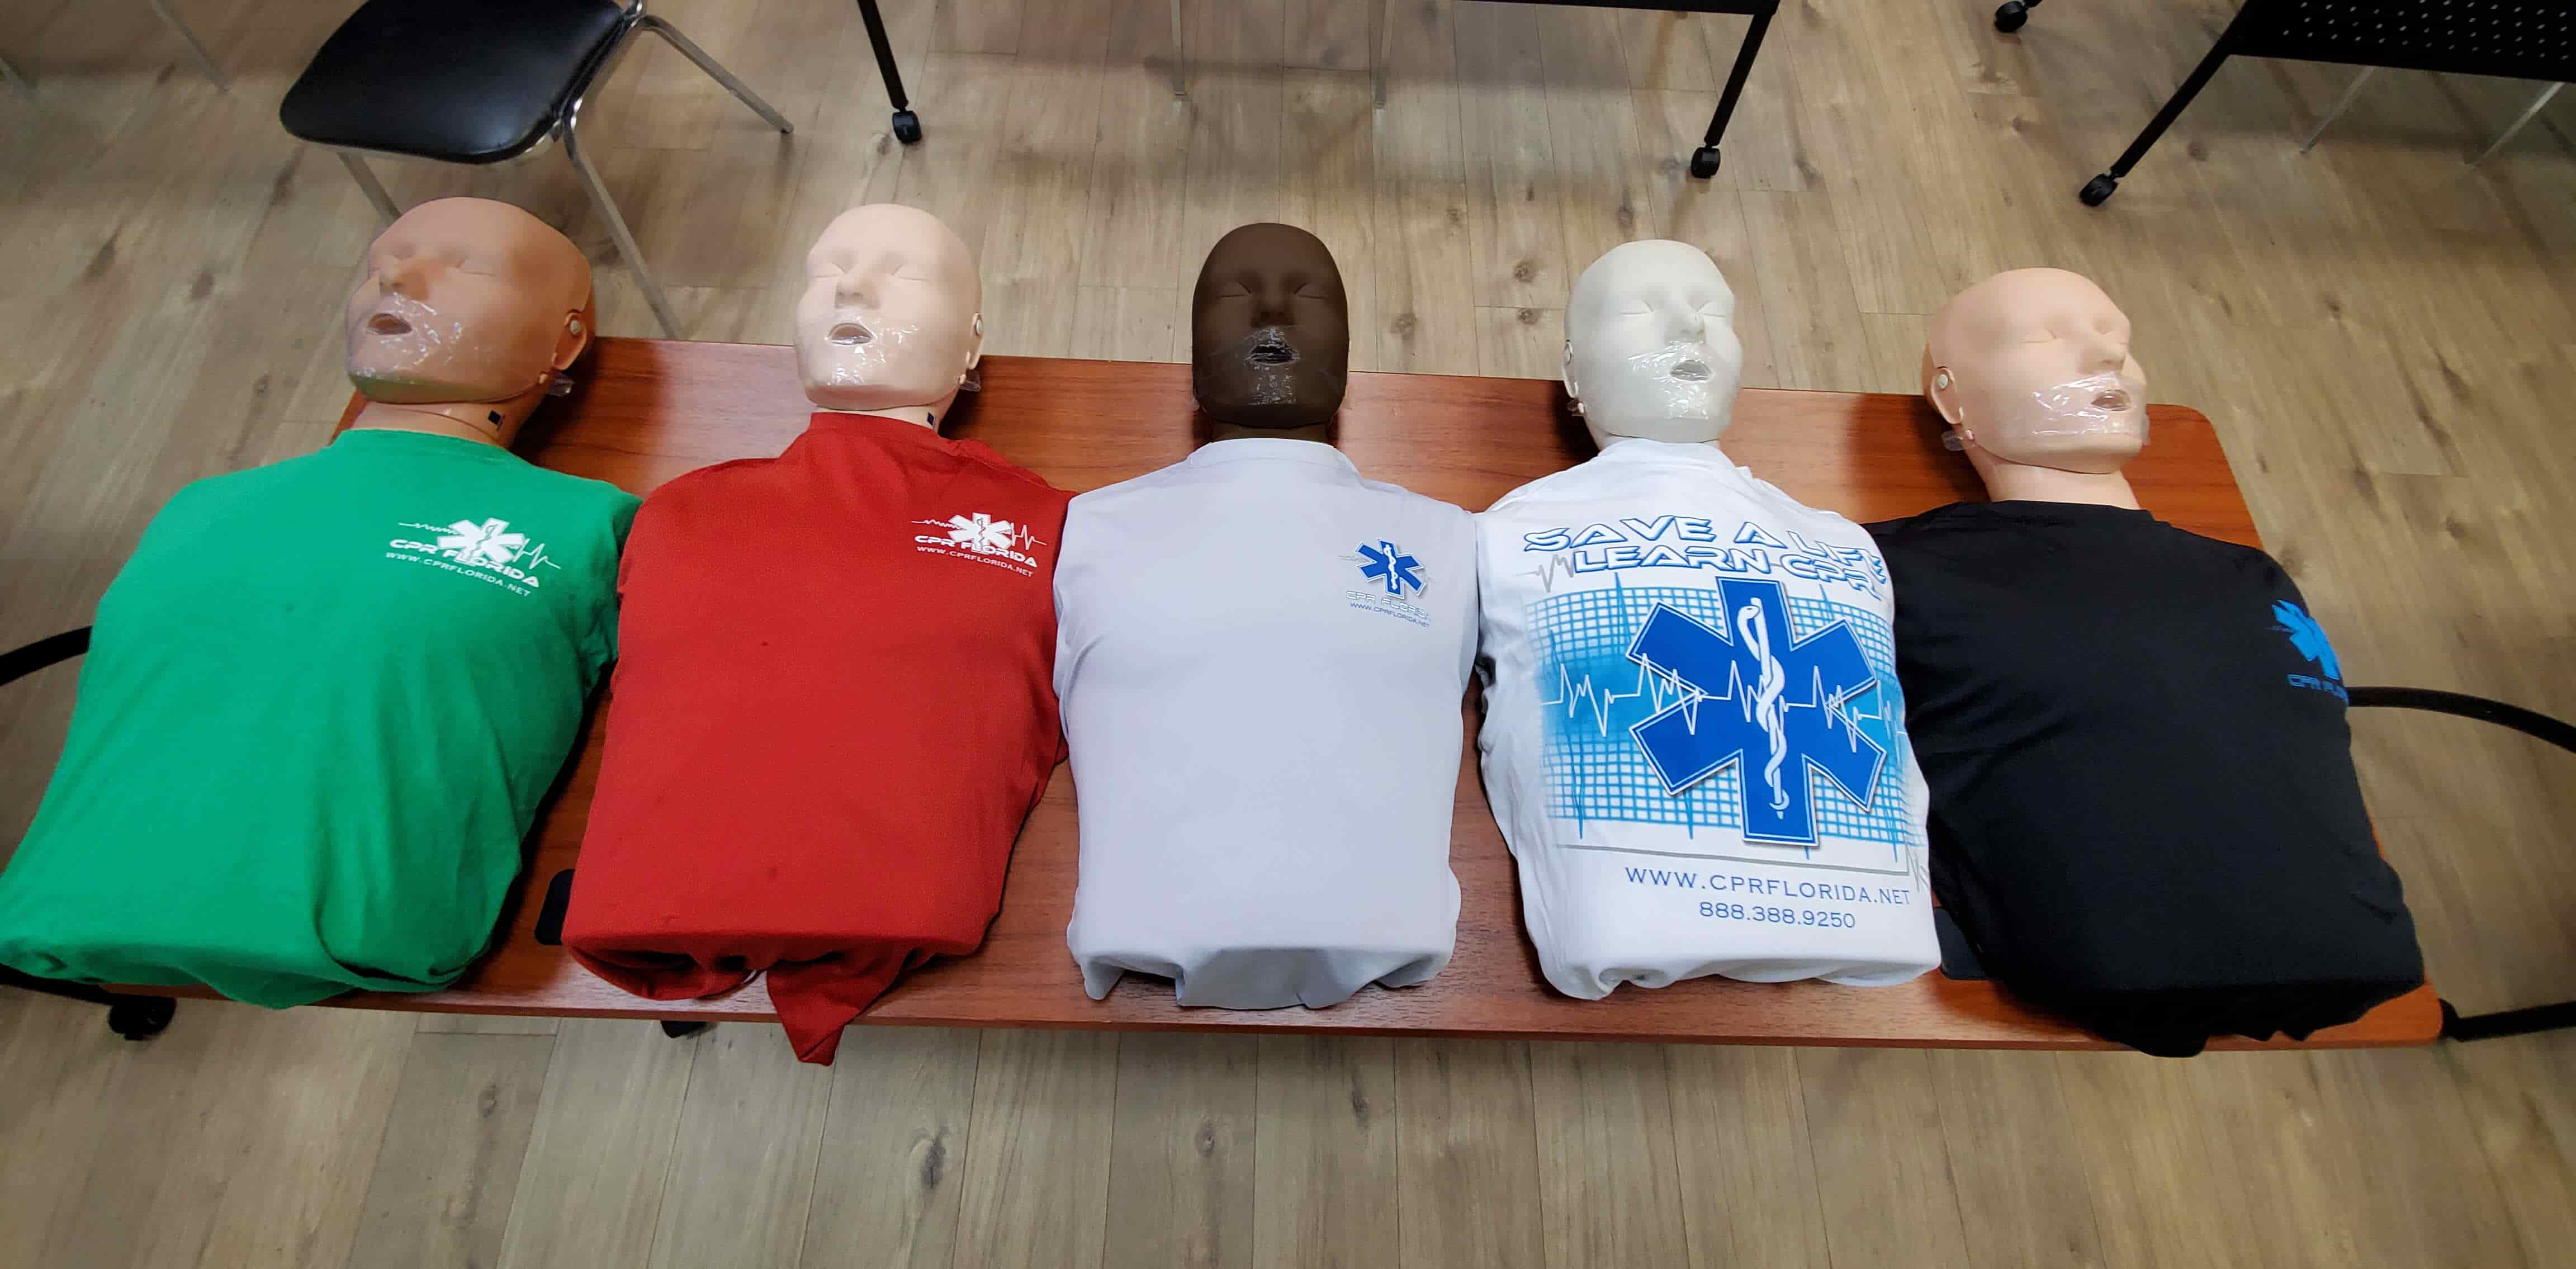 cpr aed first aid classes